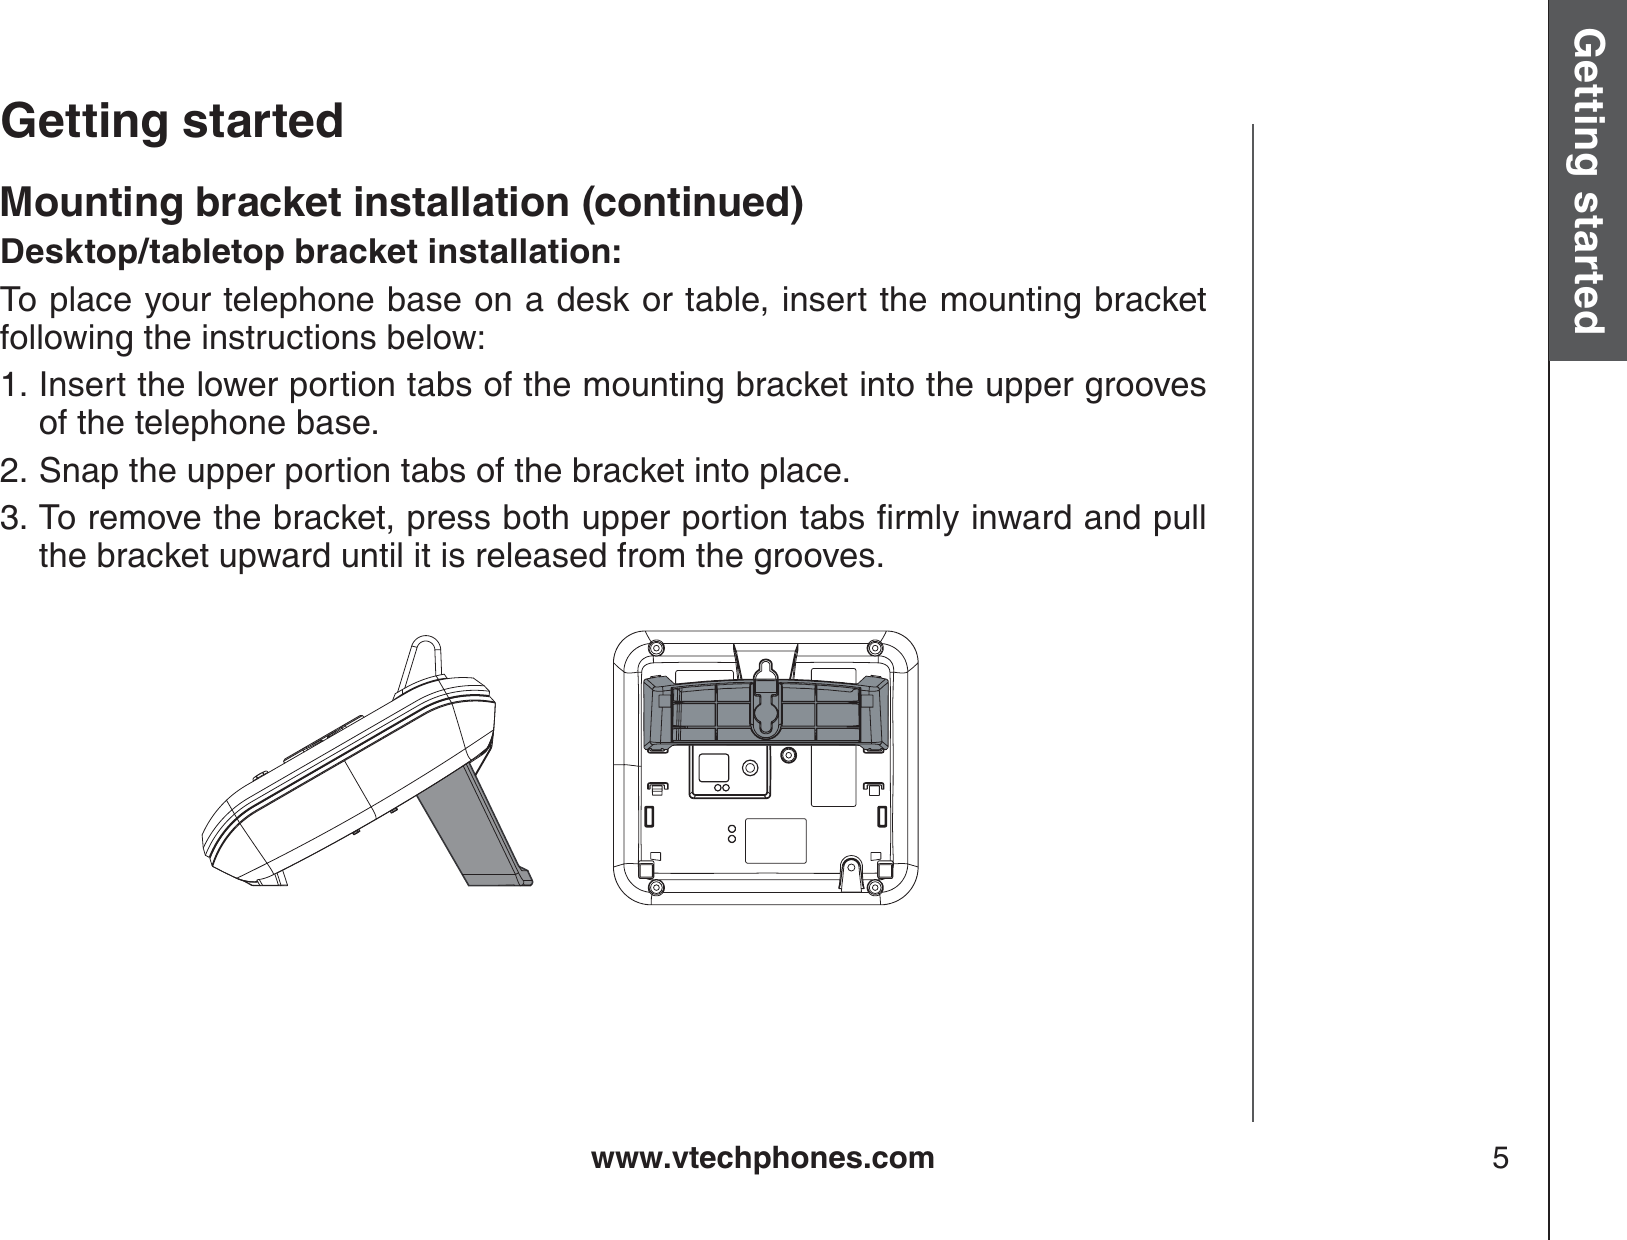 www.vtechphones.com 5Getting started Basic operationGetting startedMounting bracket installation (continued)Desktop/tabletop bracket installation:To place your telephone base on a desk or table, insert the mounting bracket following the instructions below:Insert the lower portion tabs of the mounting bracket into the upper grooves of the telephone base.Snap the upper portion tabs of the bracket into place.6QTGOQXGVJGDTCEMGVRTGUUDQVJWRRGTRQTVKQPVCDUſTON[KPYCTFCPFRWNNthe bracket upward until it is released from the grooves.1.2.3.